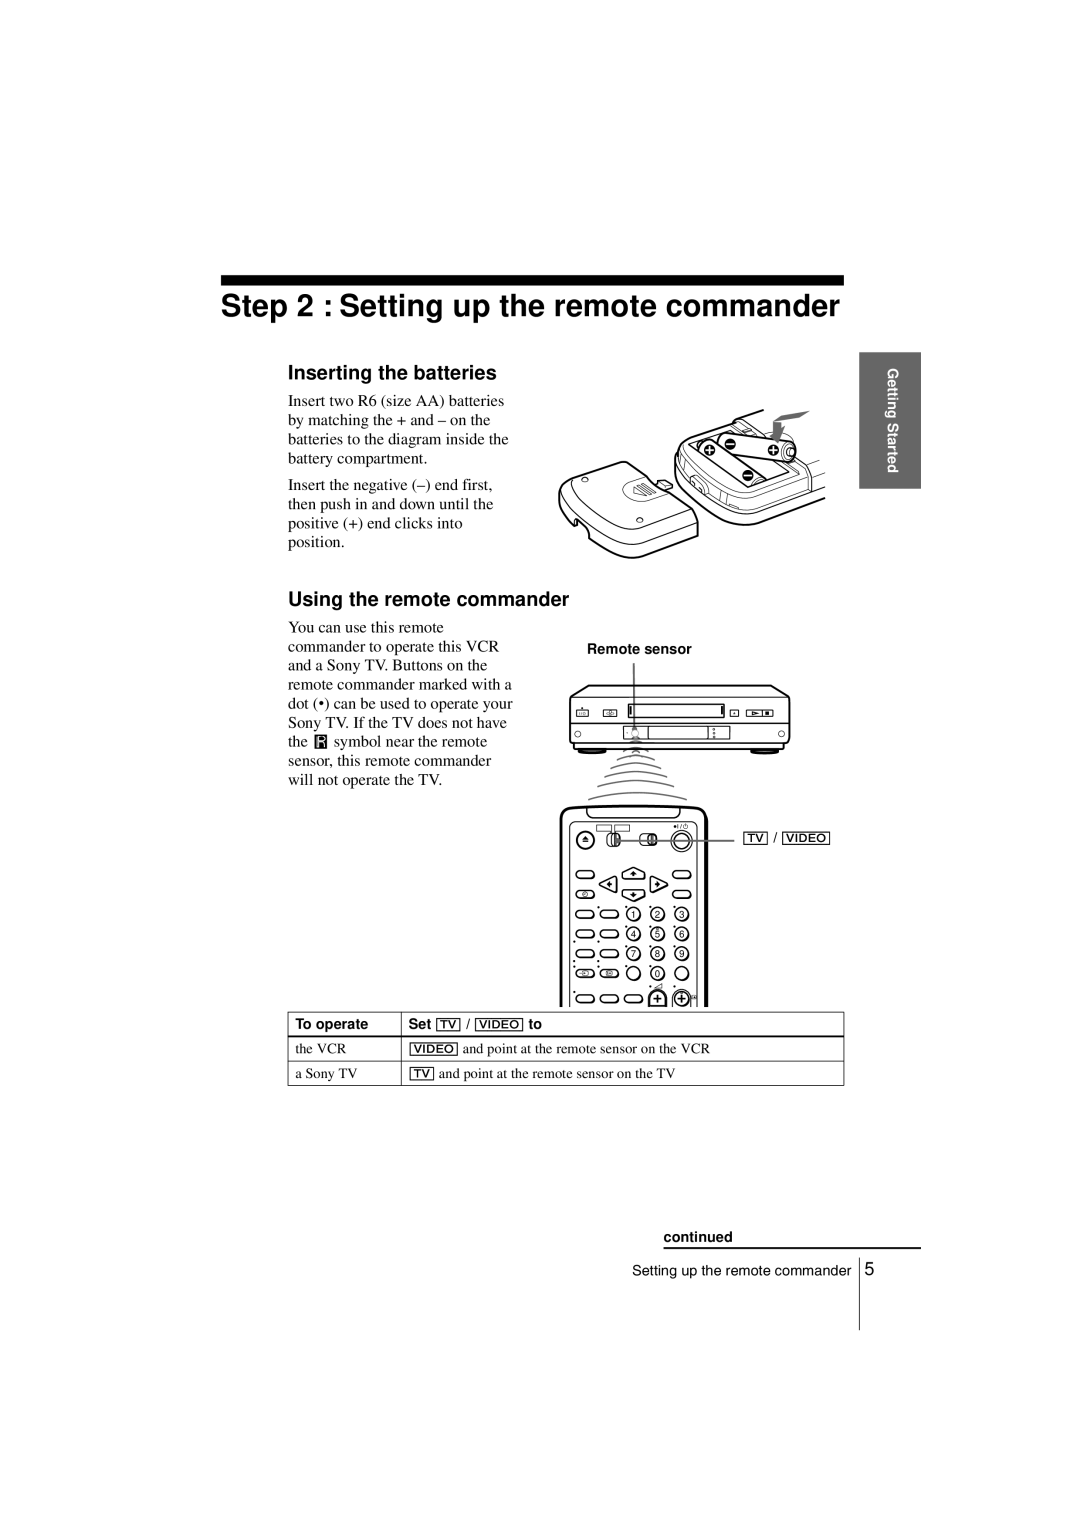 Sony SLV-SF990G manual Setting up the remote commander, Inserting the batteries, Using the remote commander 